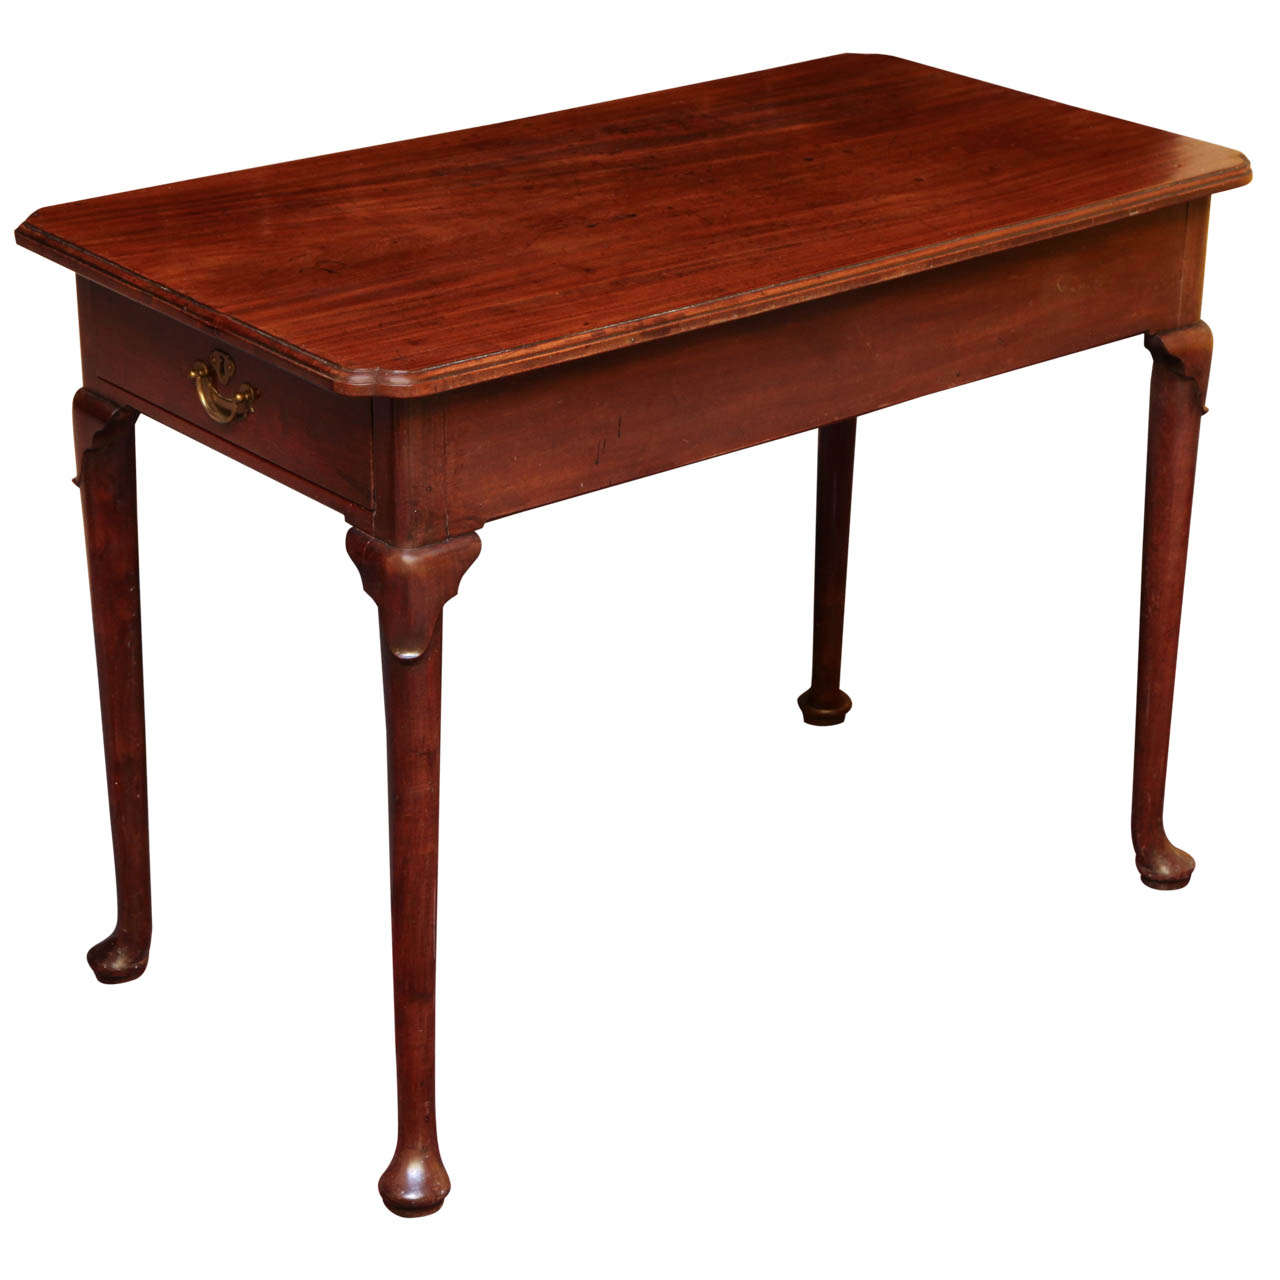 Very Fine George II Period Carved Mahogany Center Table, English, circa 1740 For Sale